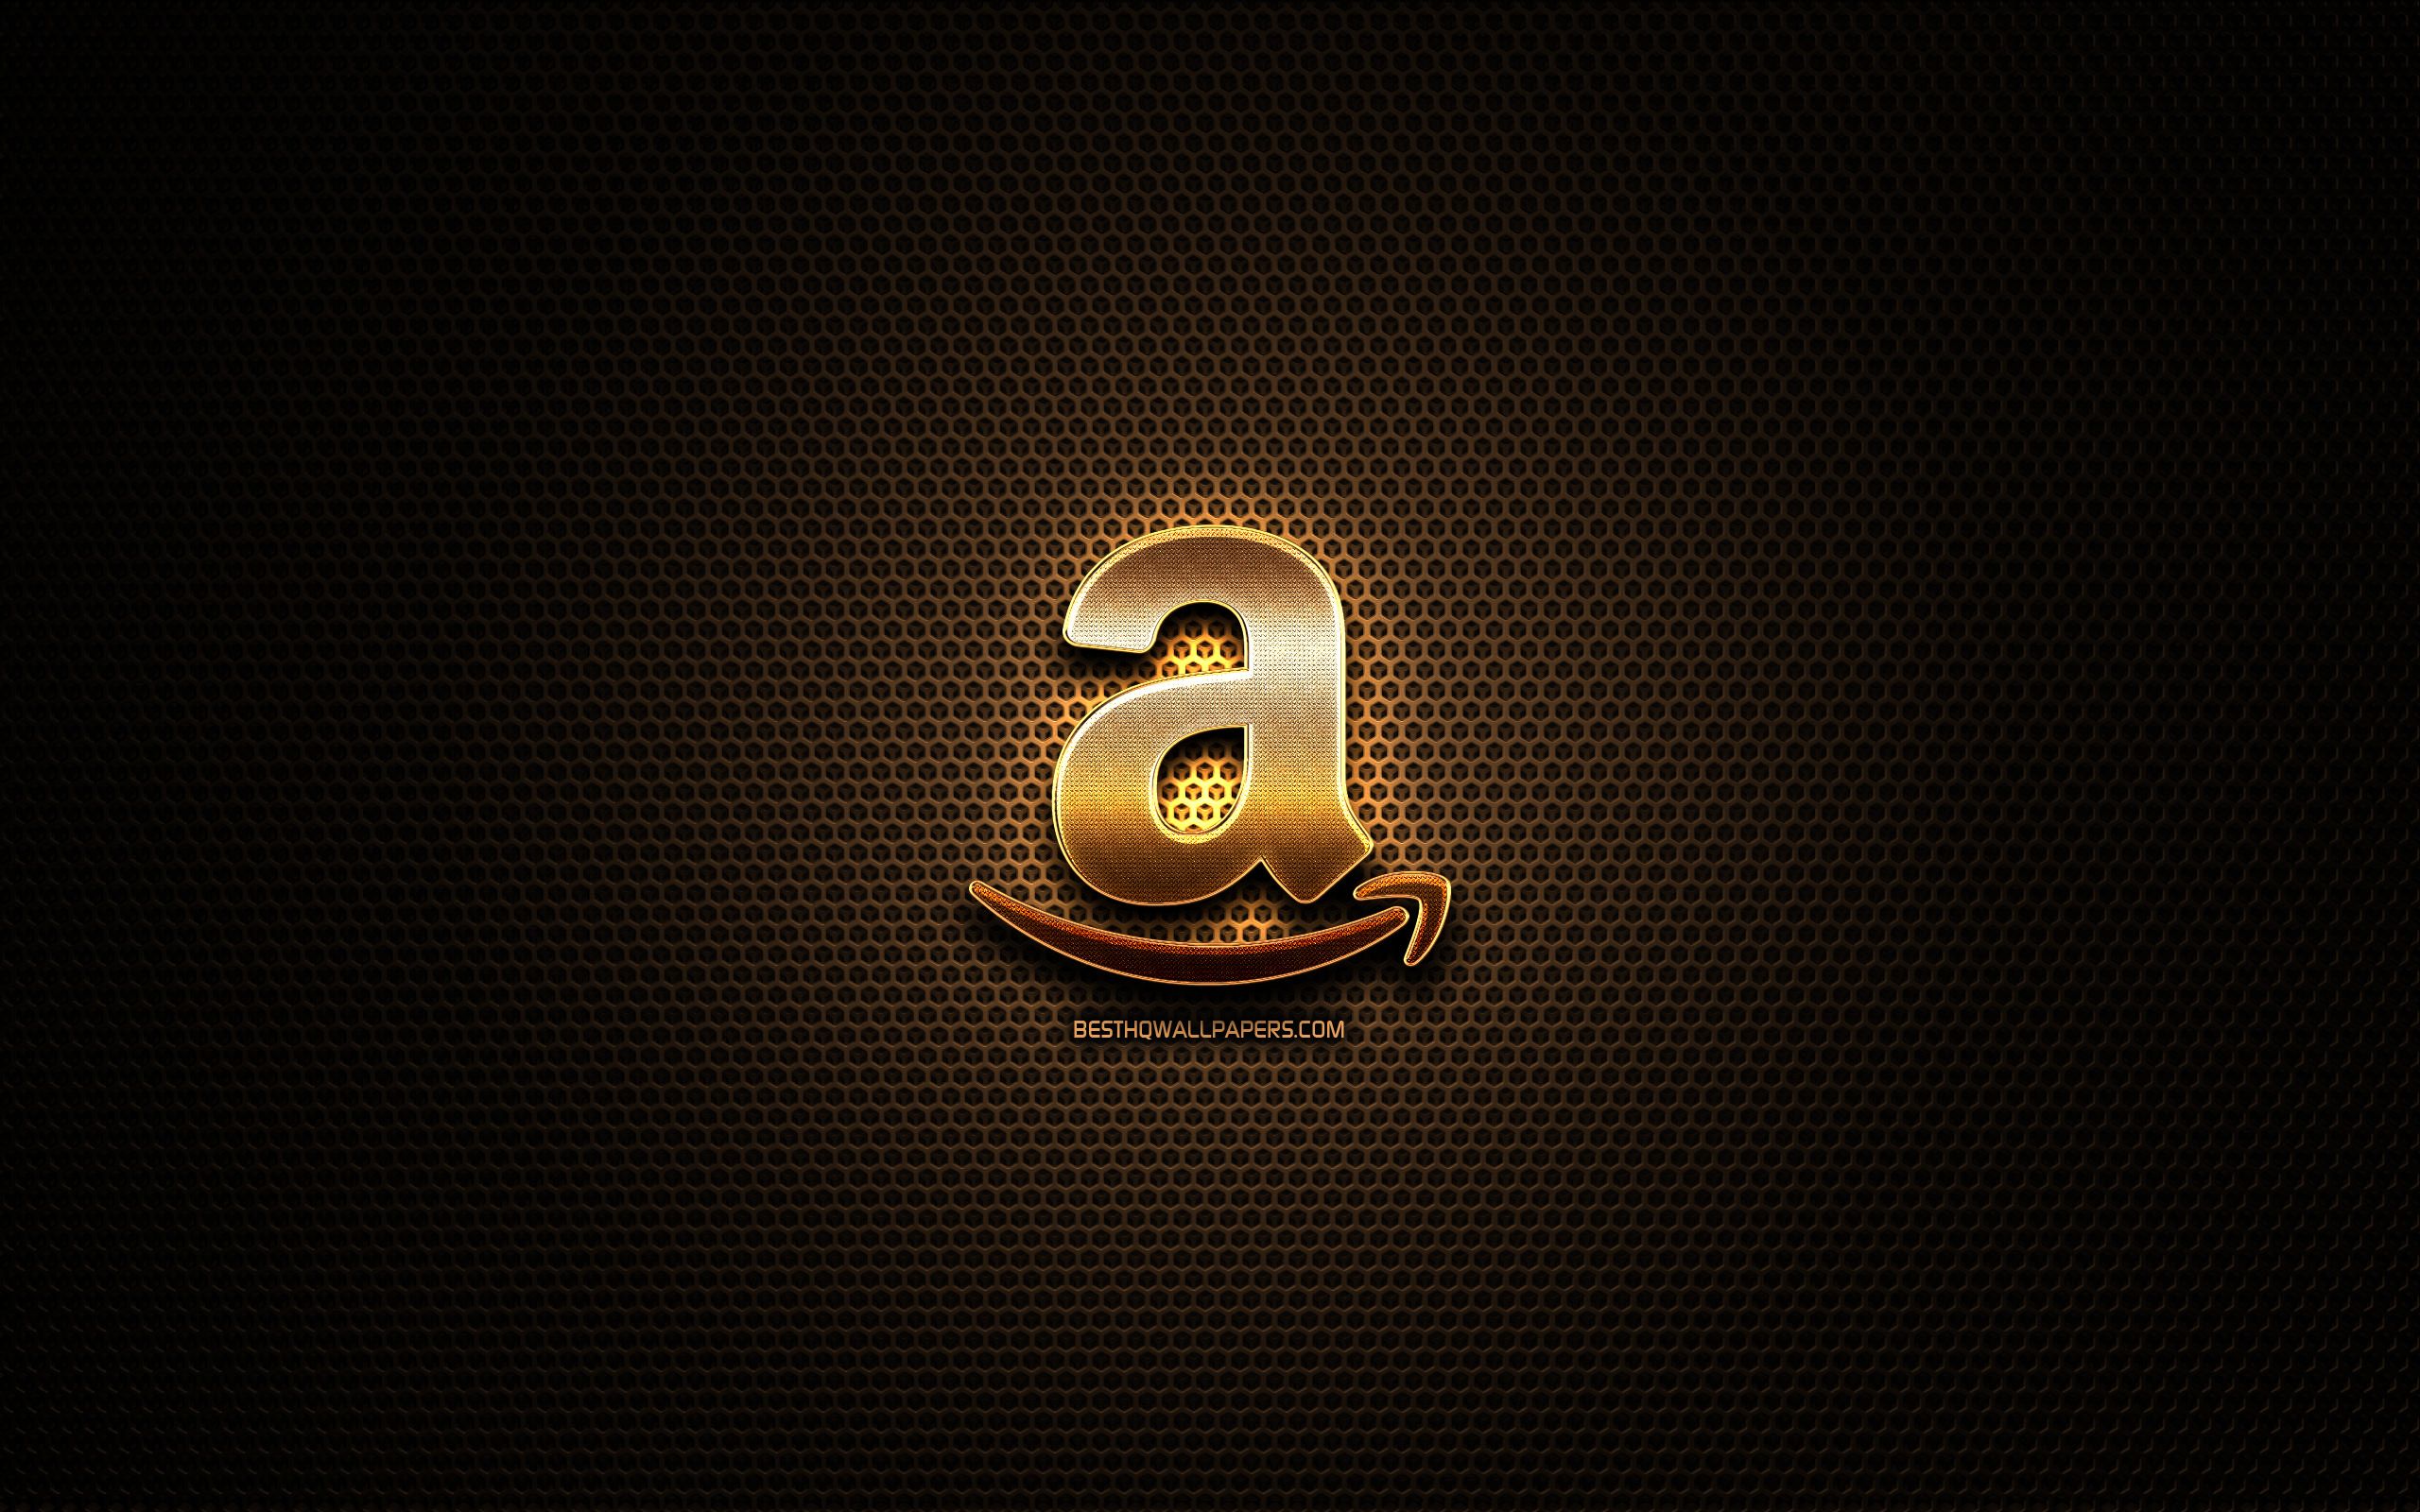 Download wallpapers Amazon glitter logo, creative, metal grid background, Amazon logo, brands, Amazon for desktop with resolution 2560x1600. High Quality HD pictures wallpapers